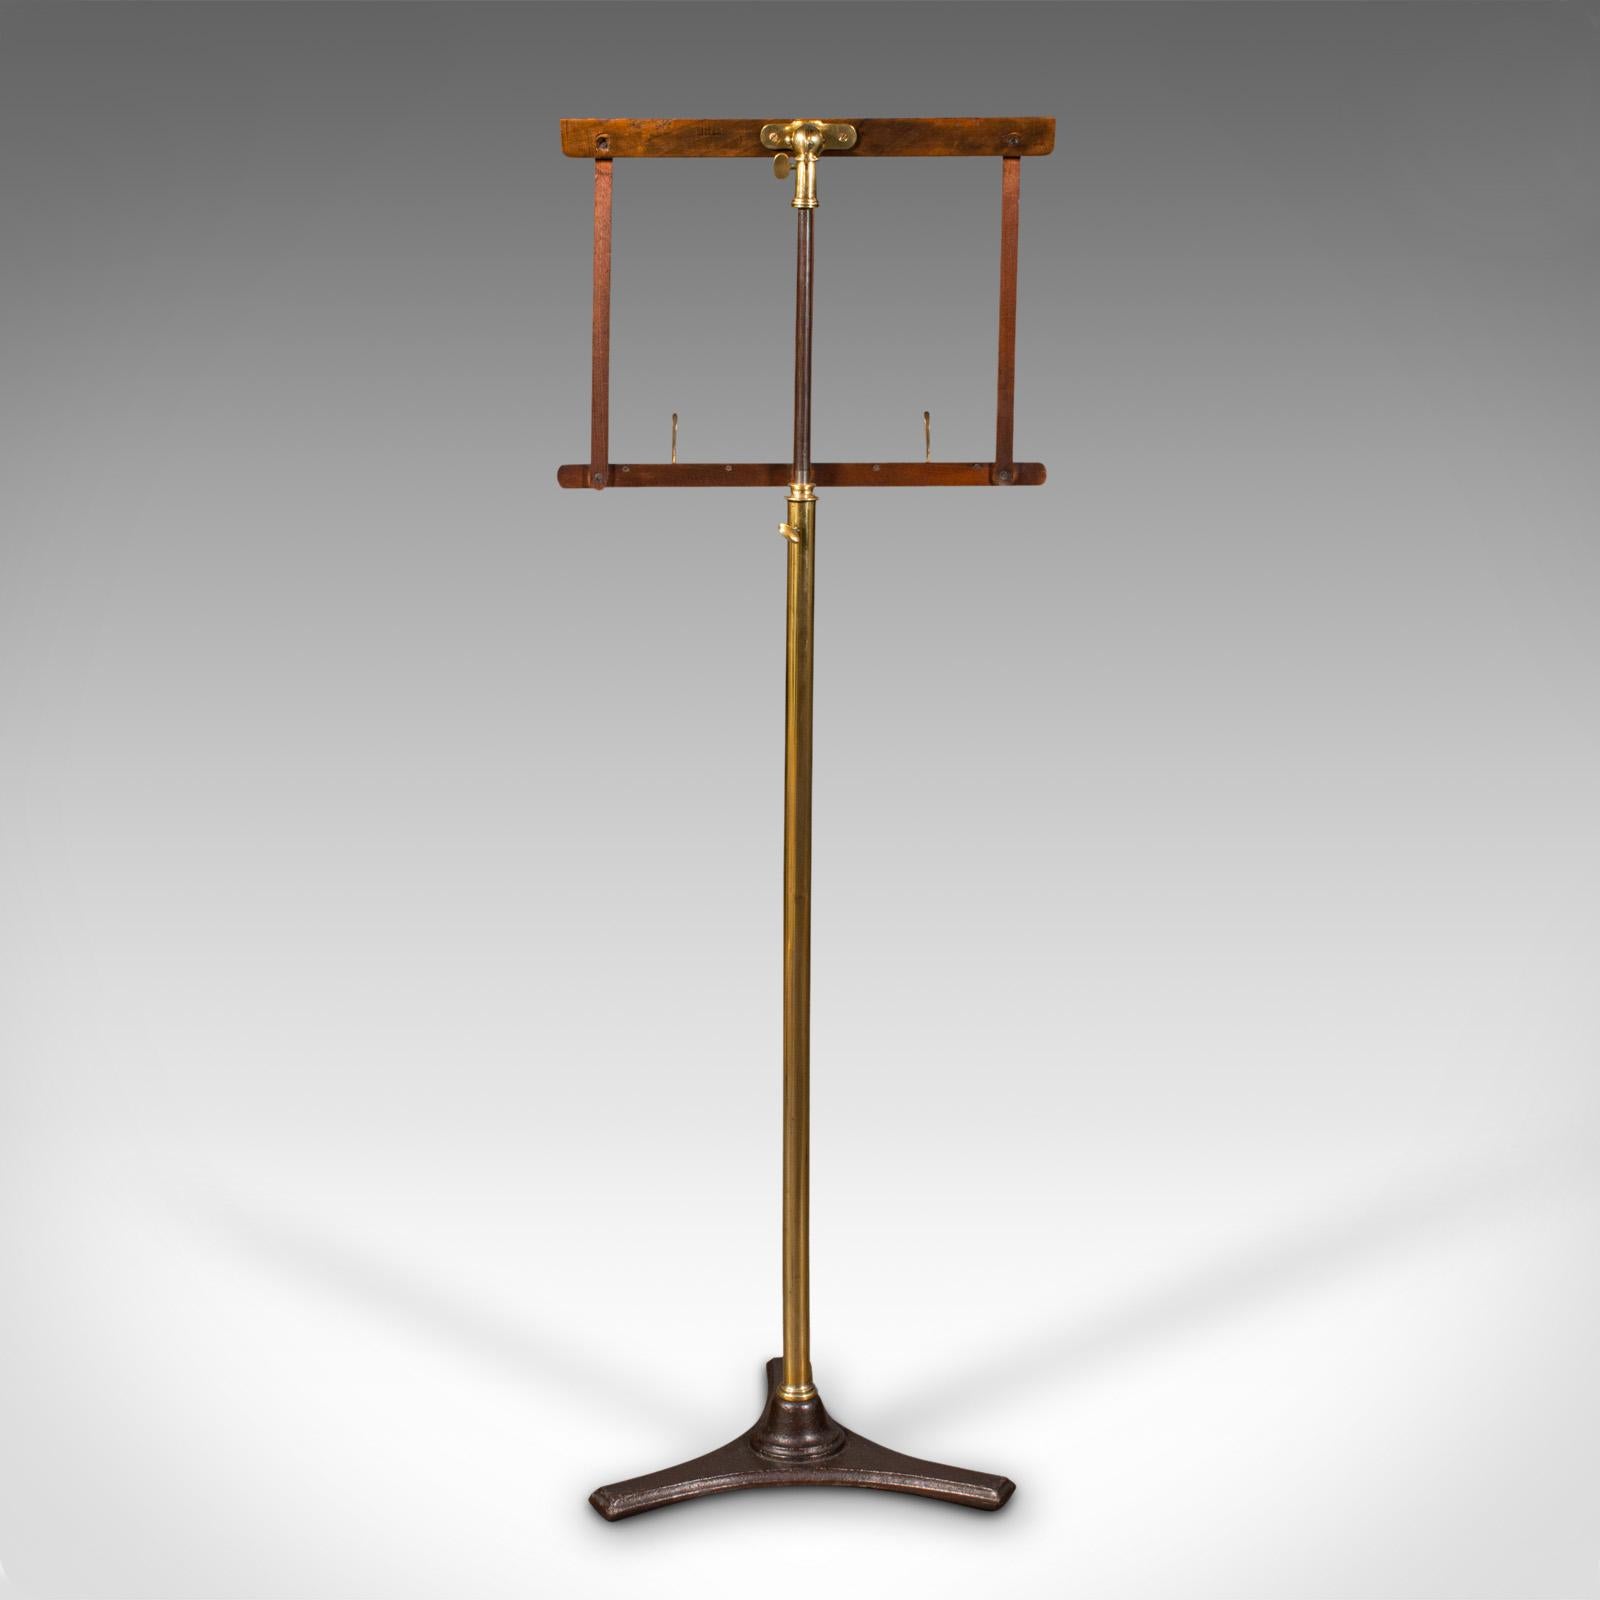 British Antique Music Stand, English, Adjustable, Recital, Lectern Rest, Victorian, 1870 For Sale